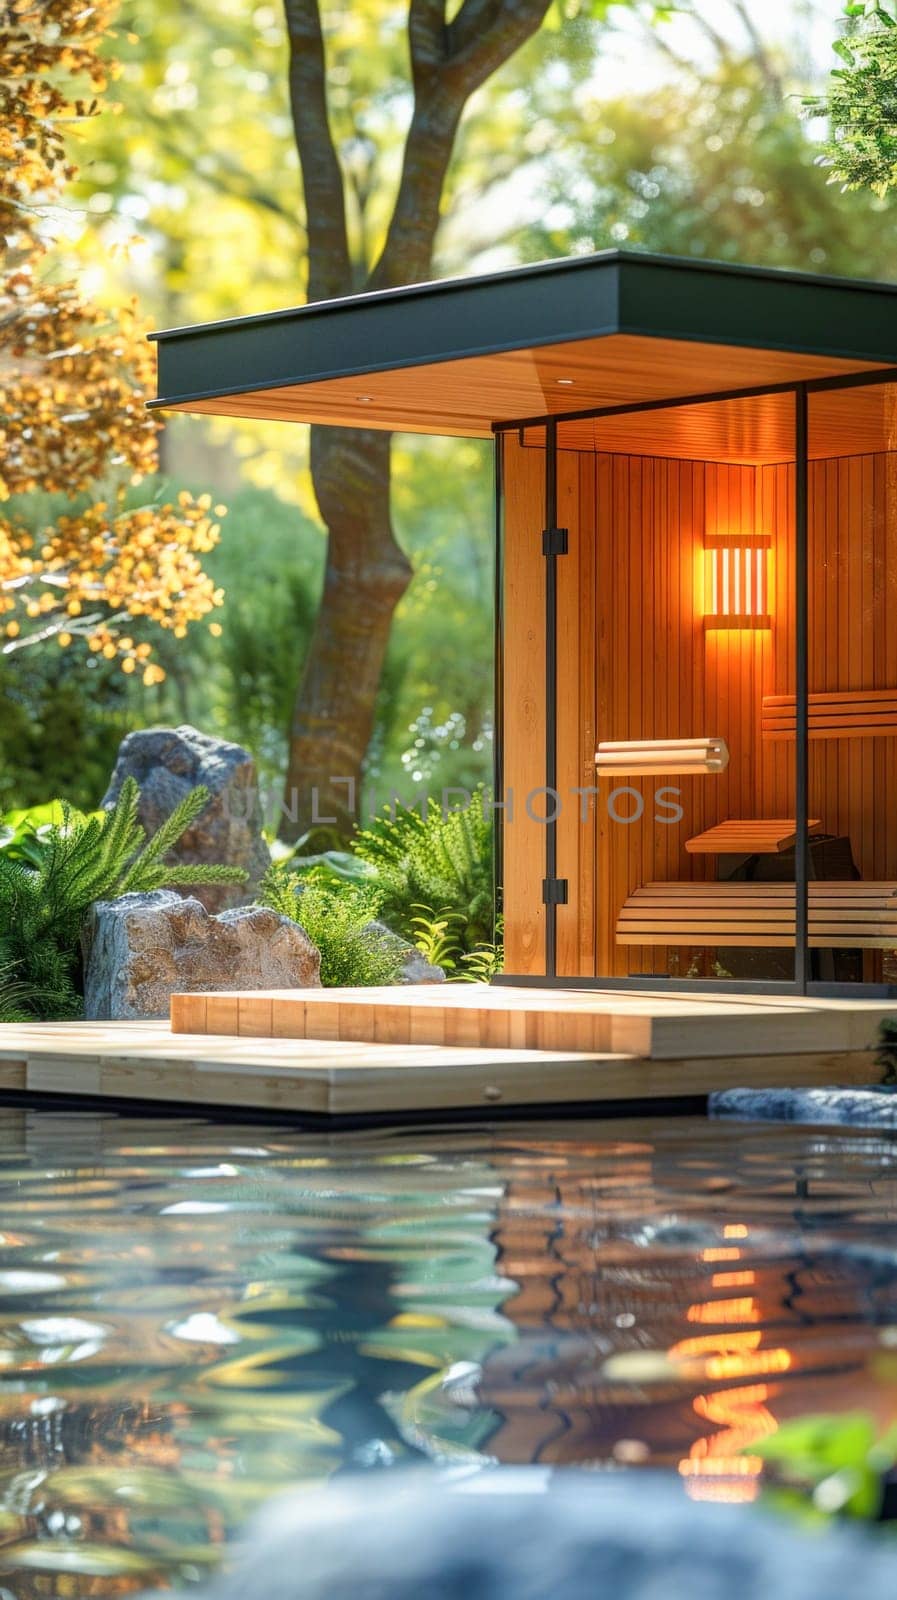 A wooden sauna by a pond, surrounded by trees in a forest, offers a tranquil escape in a natural setting